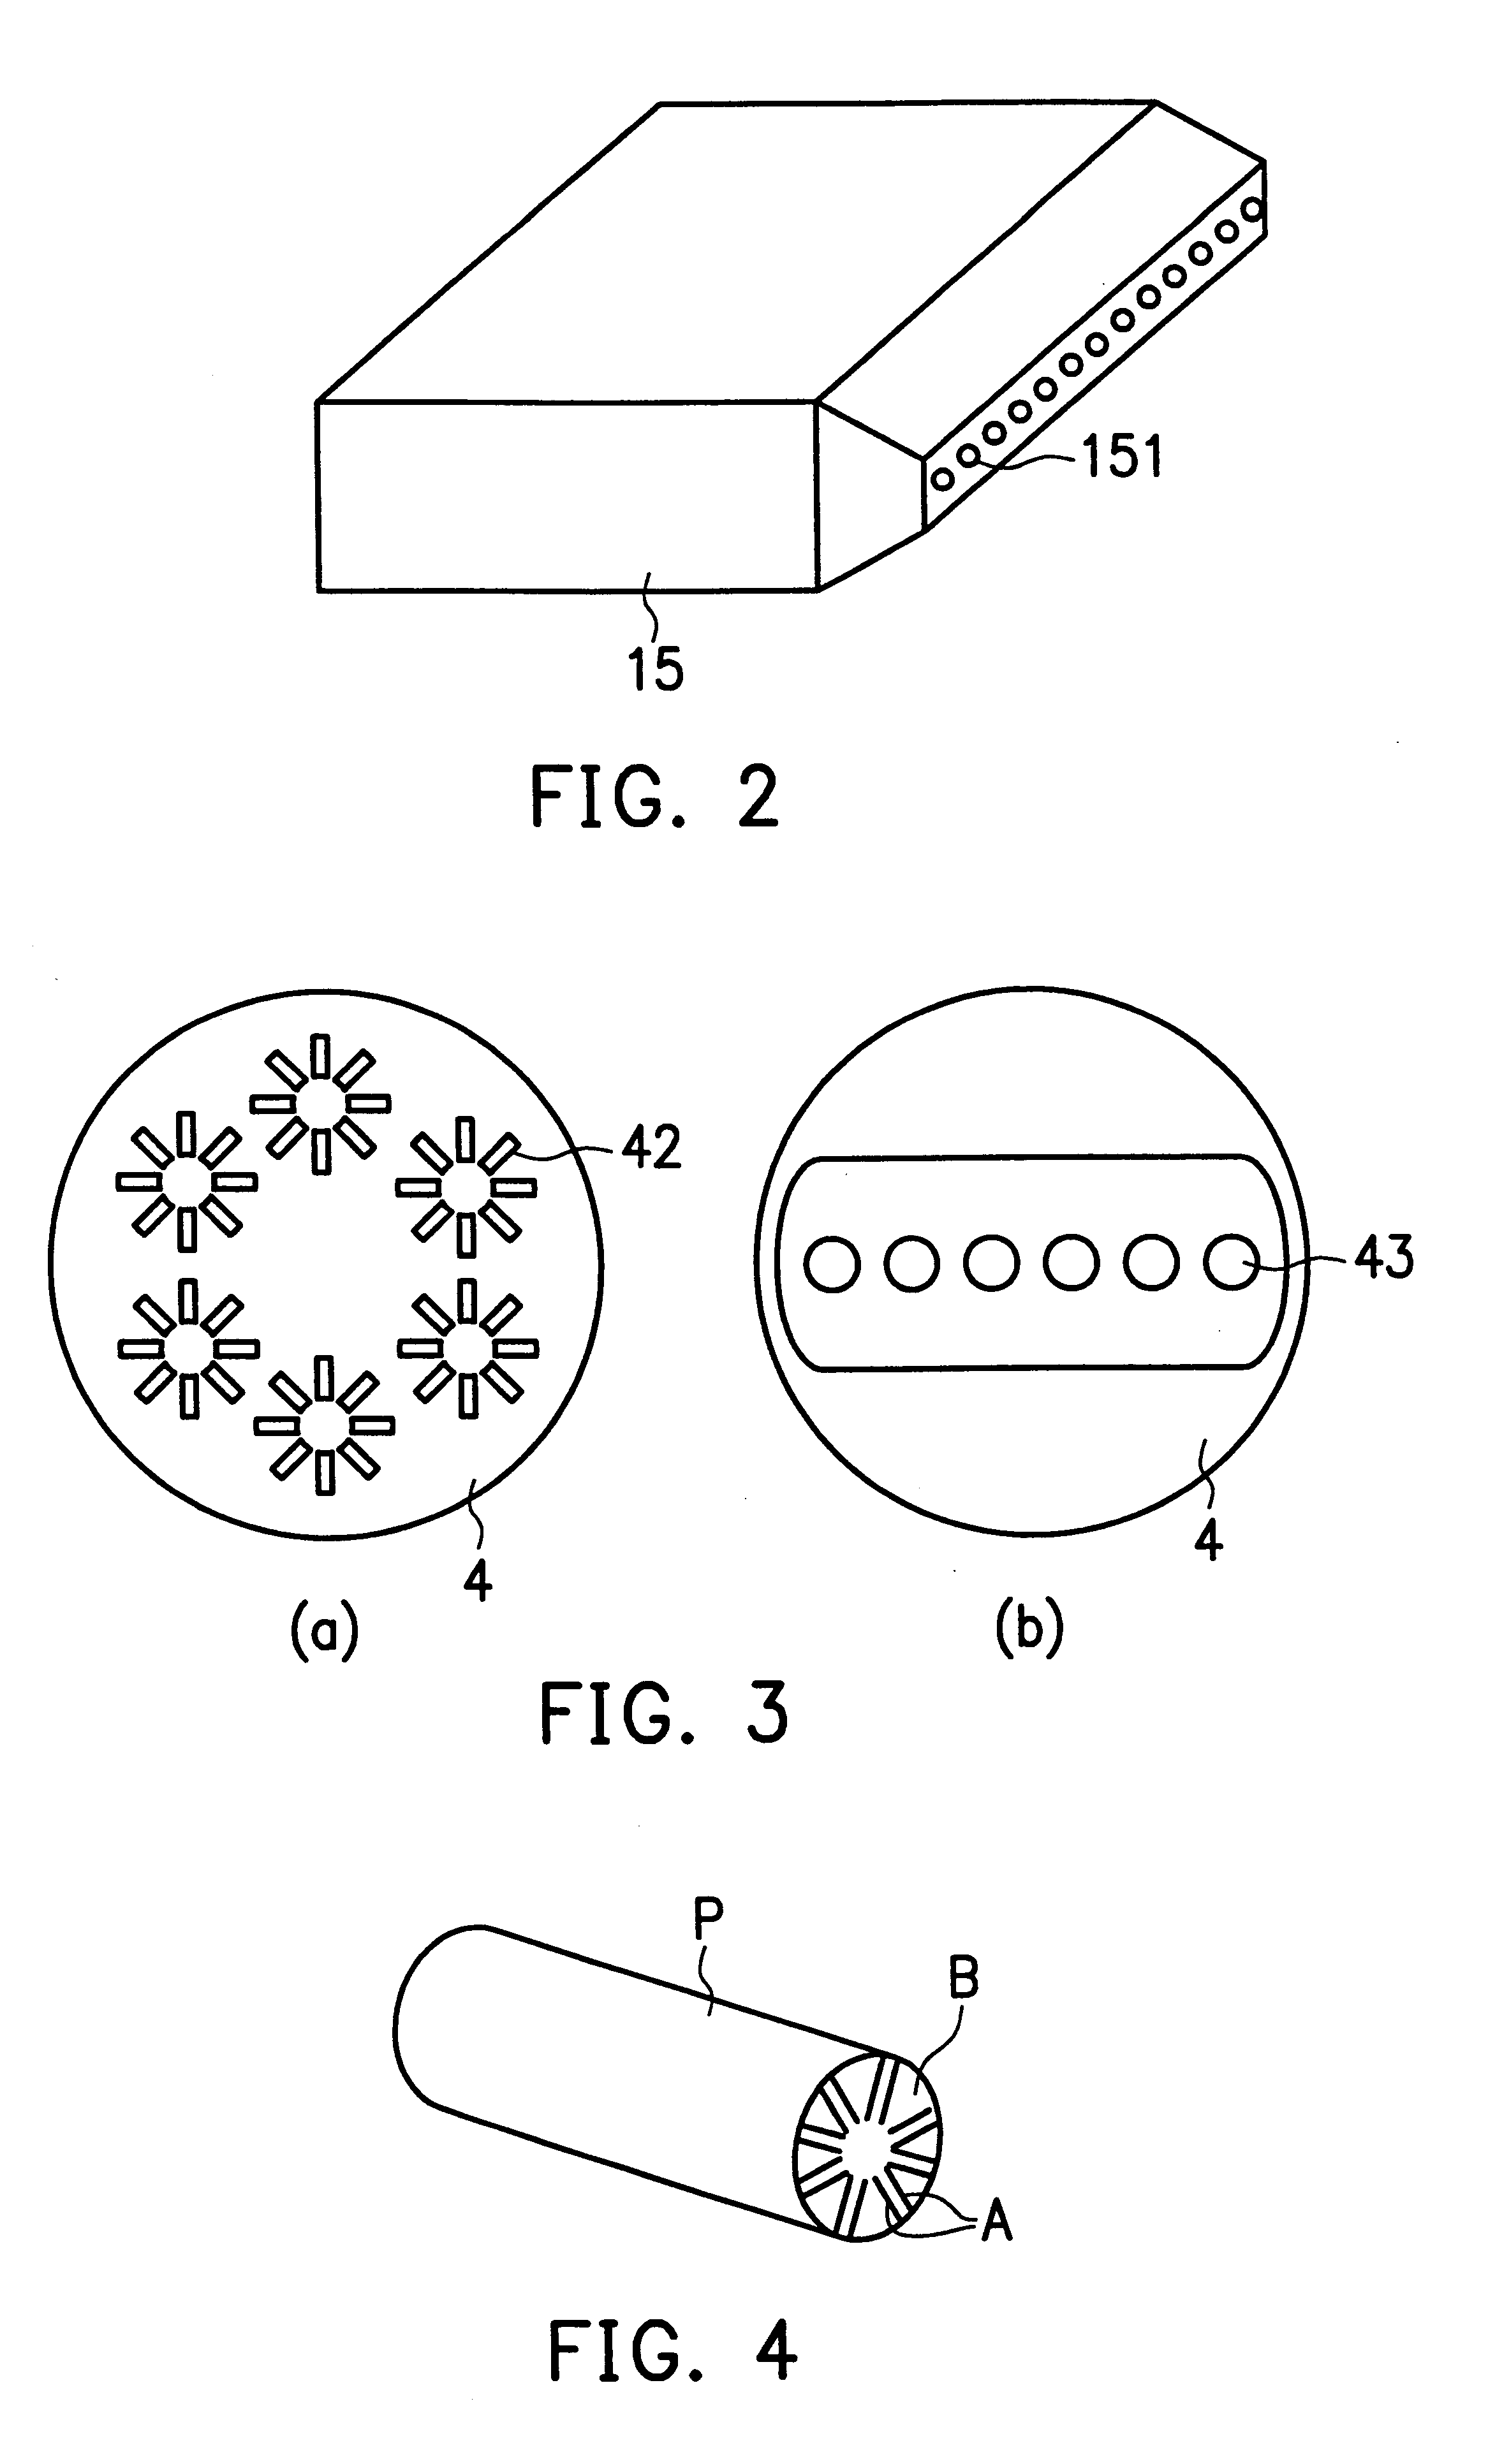 Process and apparatus for making radially arranged aluminum foil-filled plastic pellets to shield against electromagnetic interference